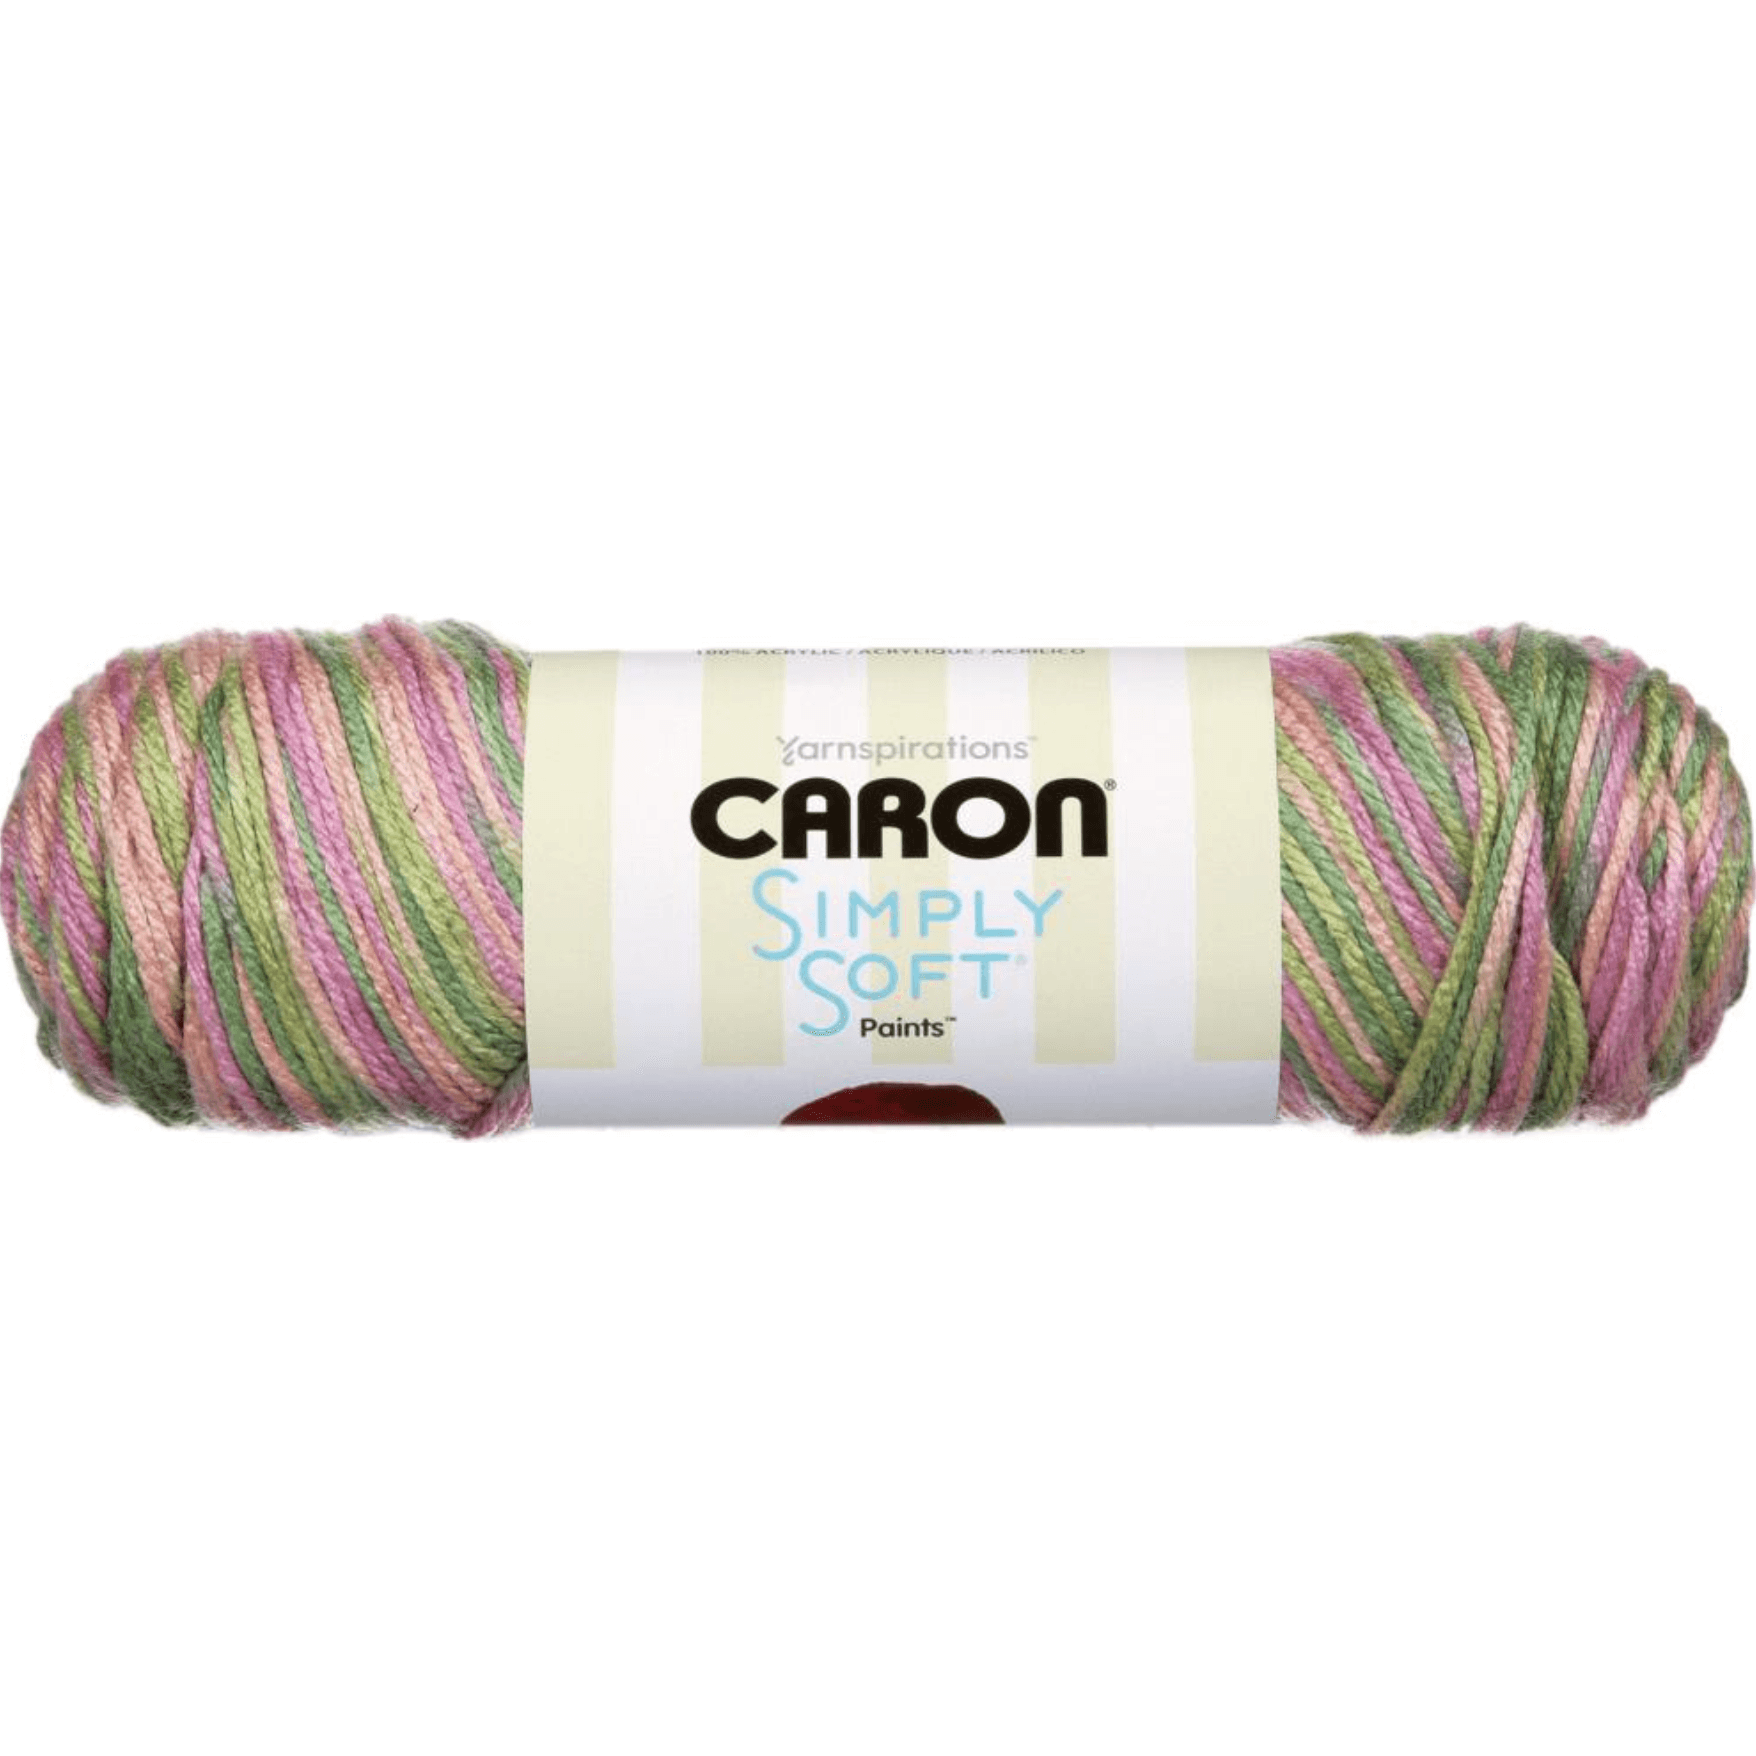 Caron Simply Soft Paints Yarn Sold As A 3 Pack